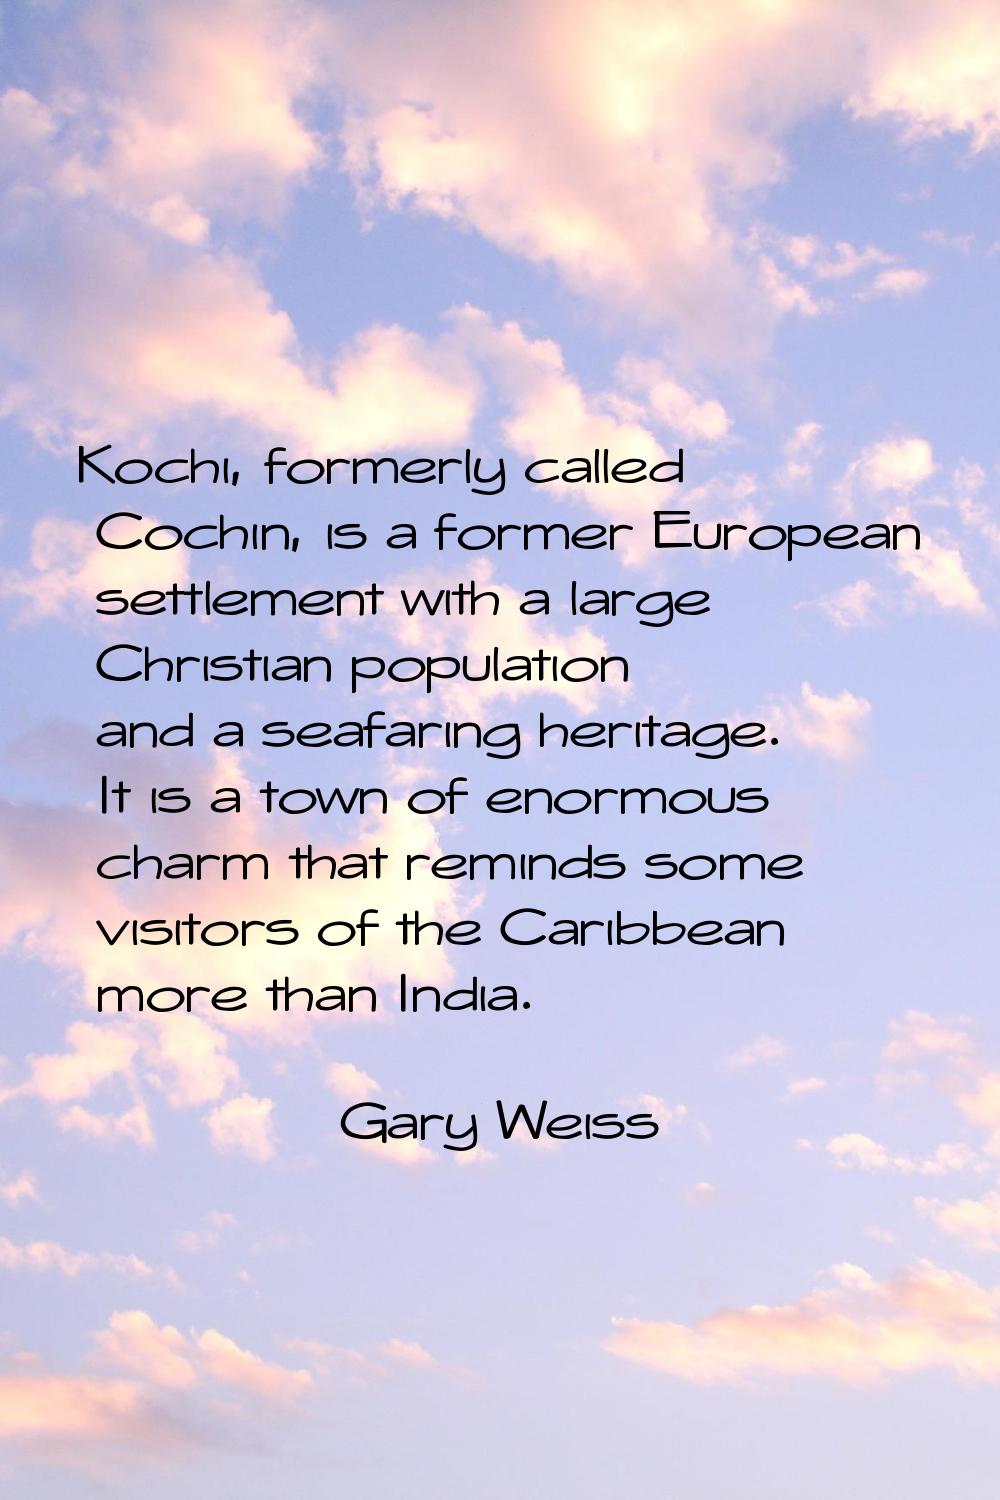 Kochi, formerly called Cochin, is a former European settlement with a large Christian population an